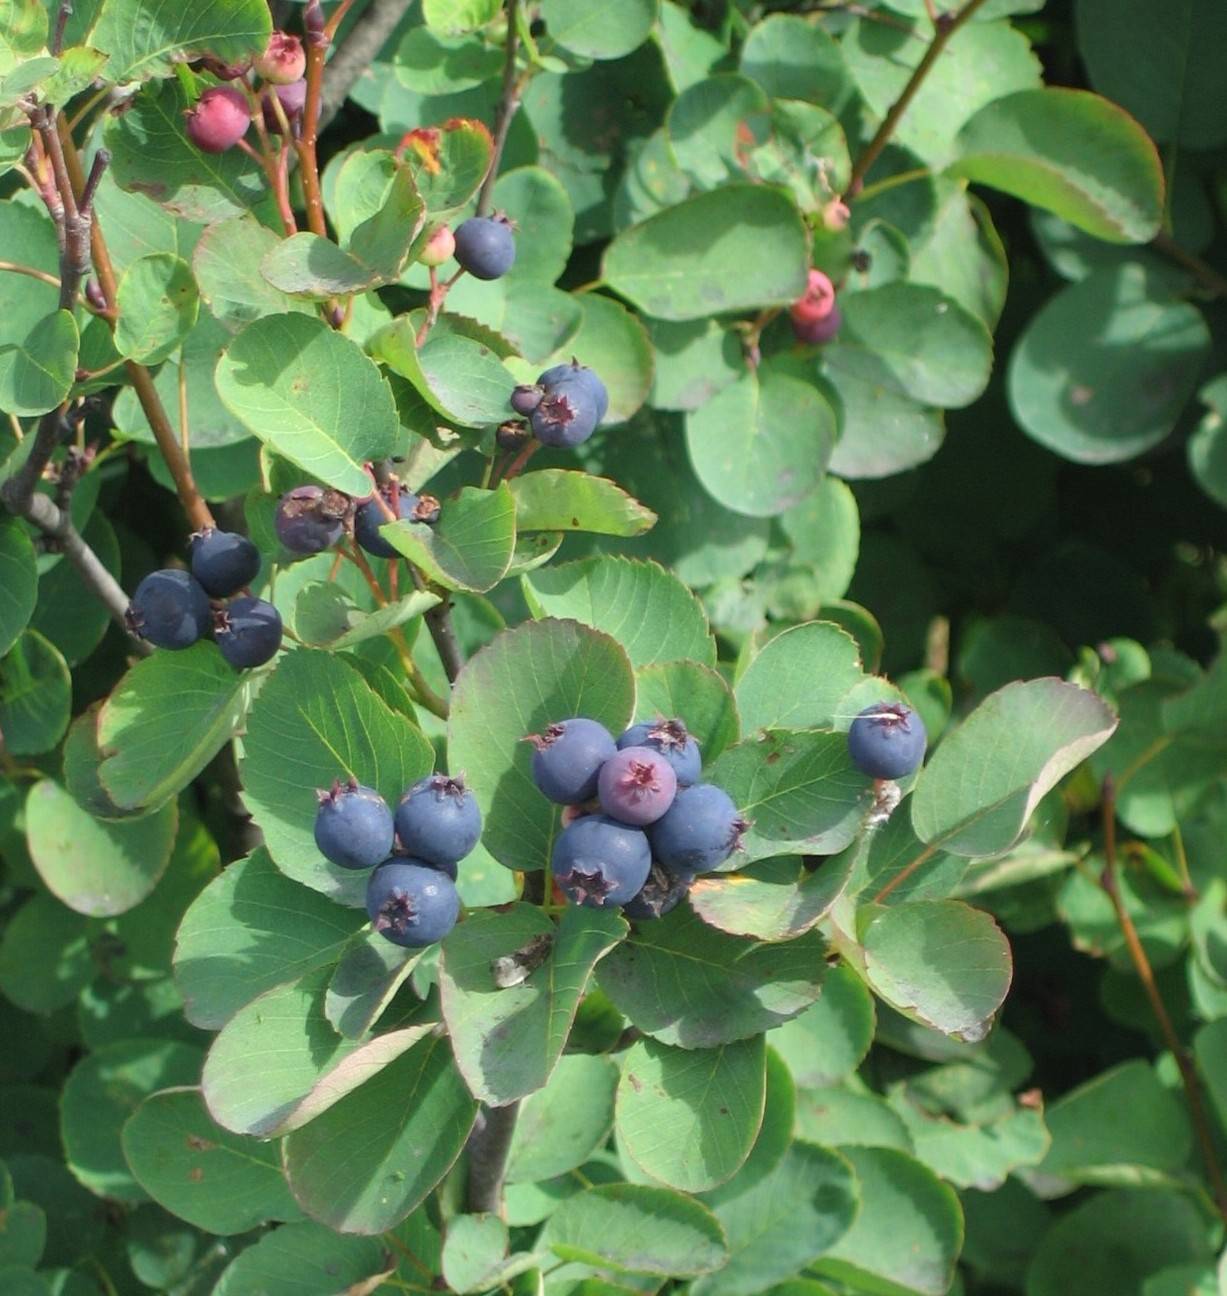 blue-pink fruits with light-green leaves and brown stems